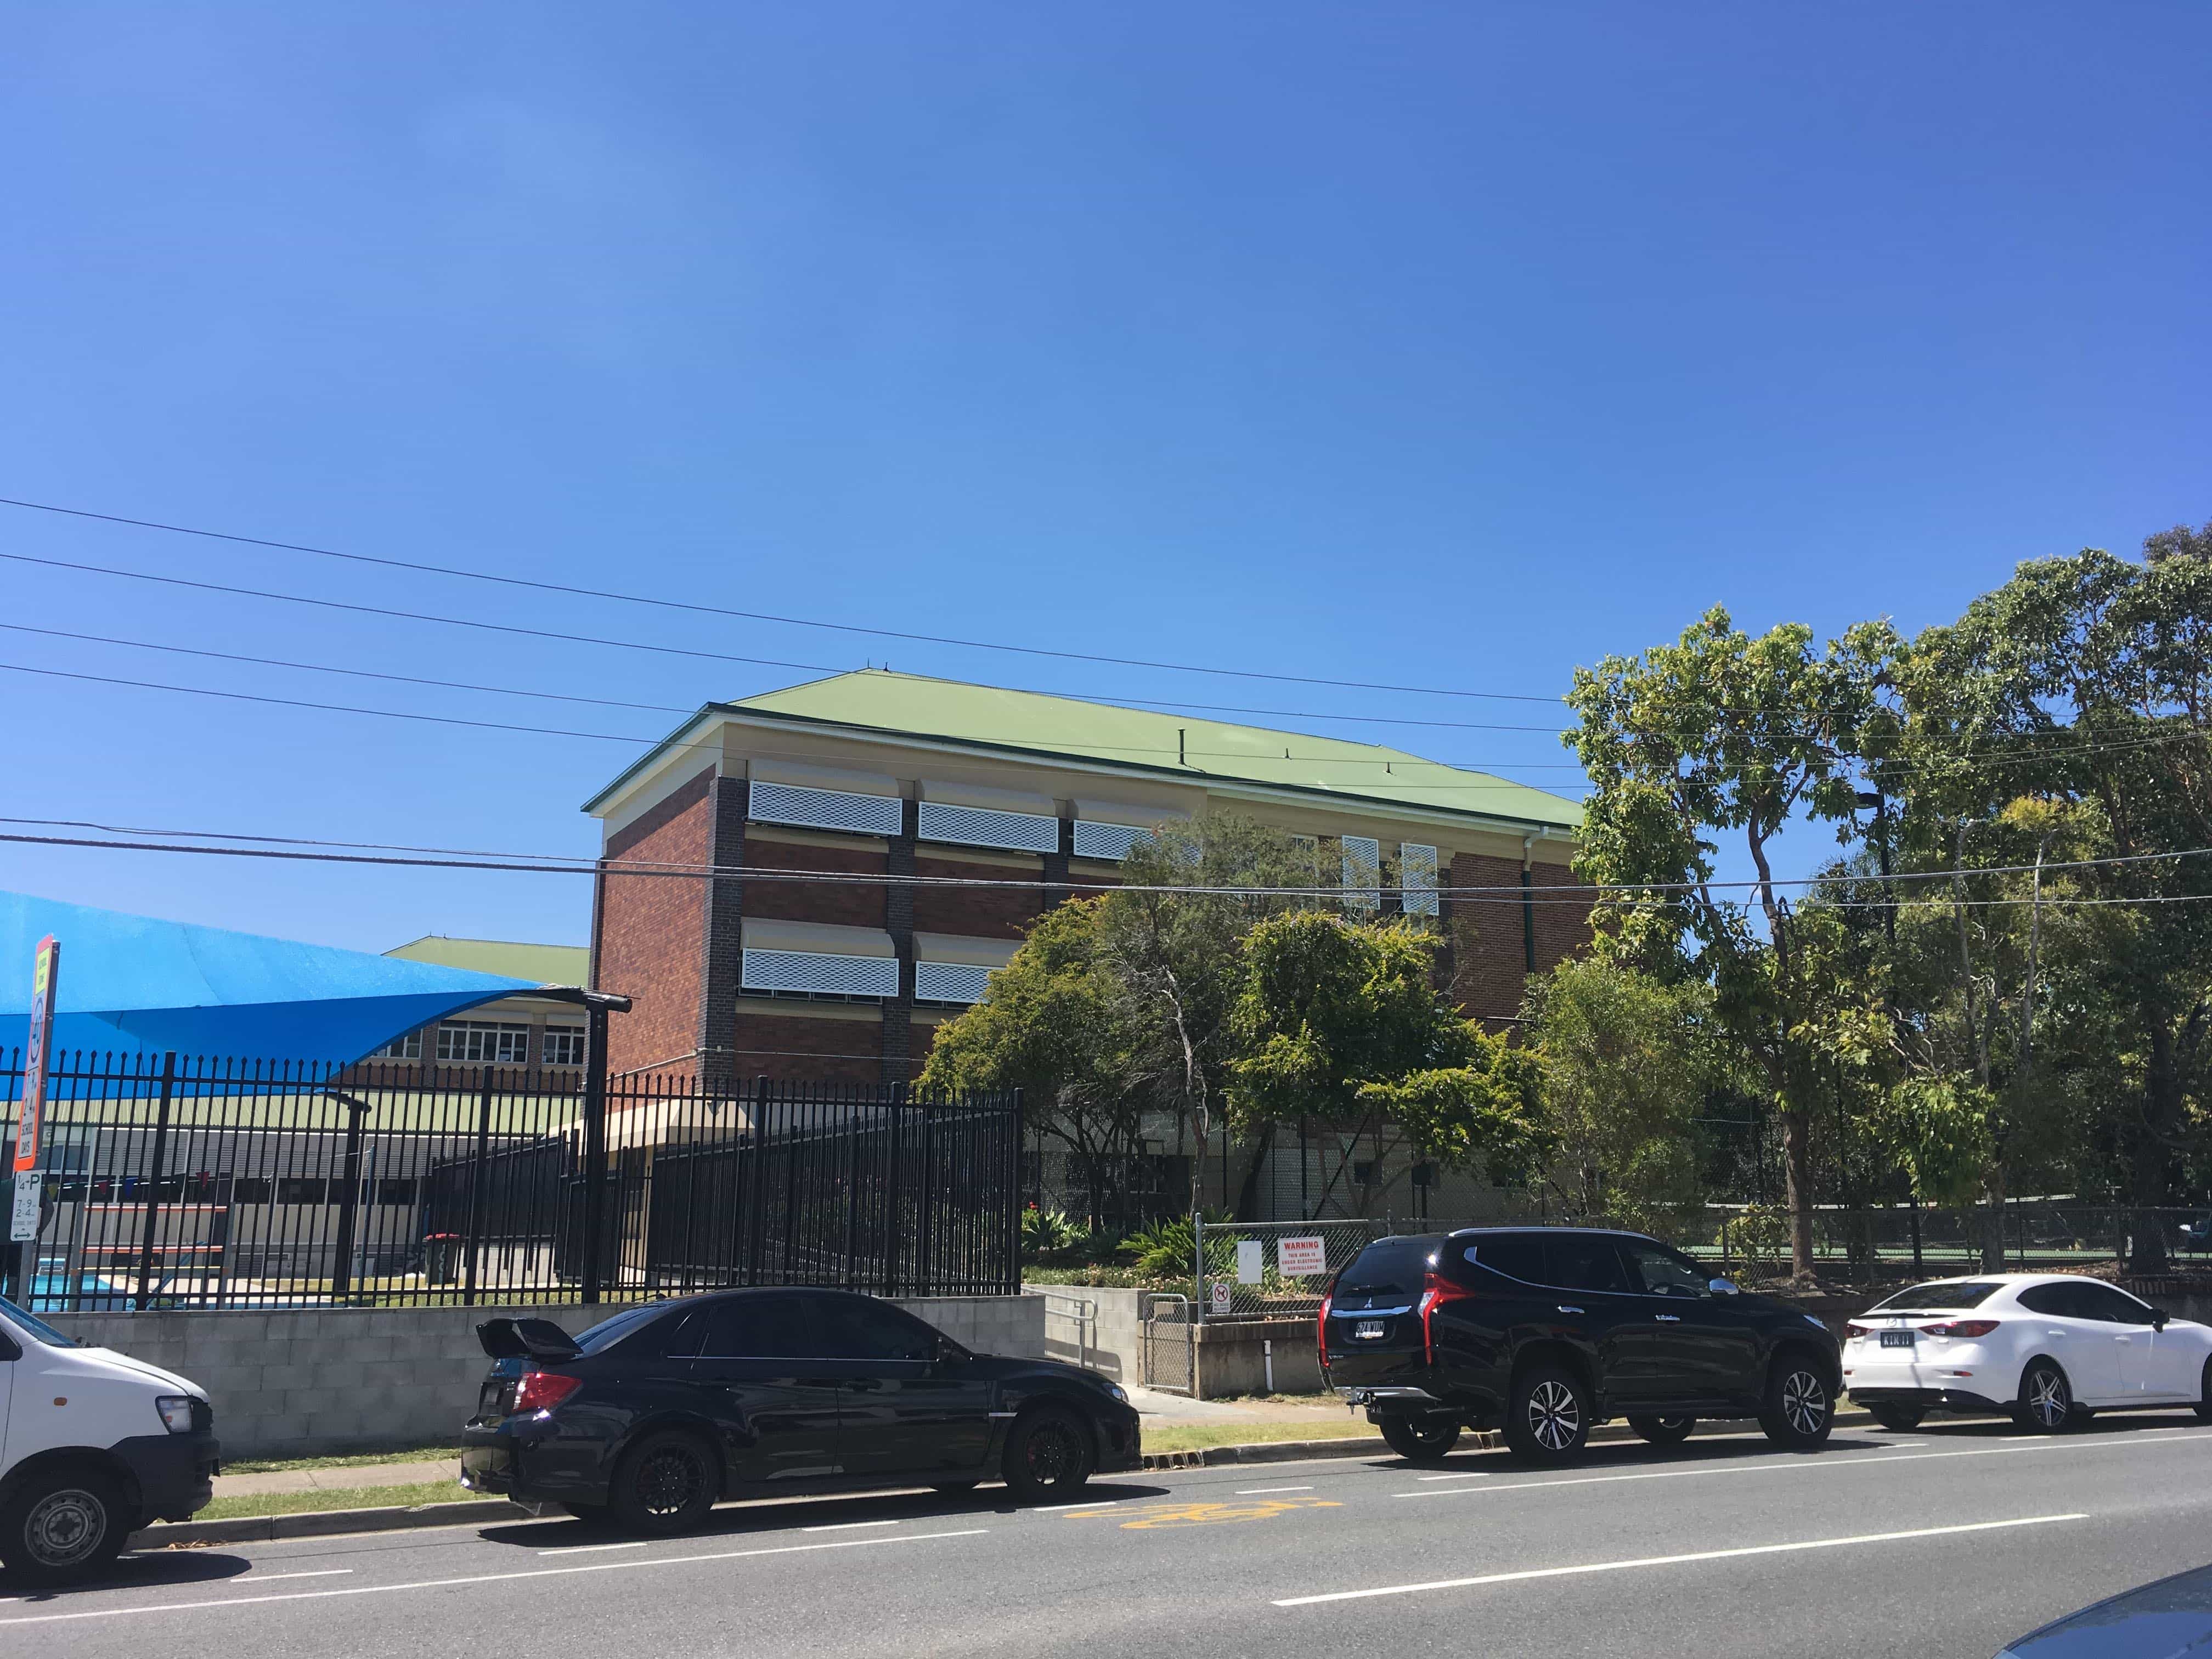 West End State School is essentially across the road from Highline. Photo taken by Property Mash 27/10/2016.